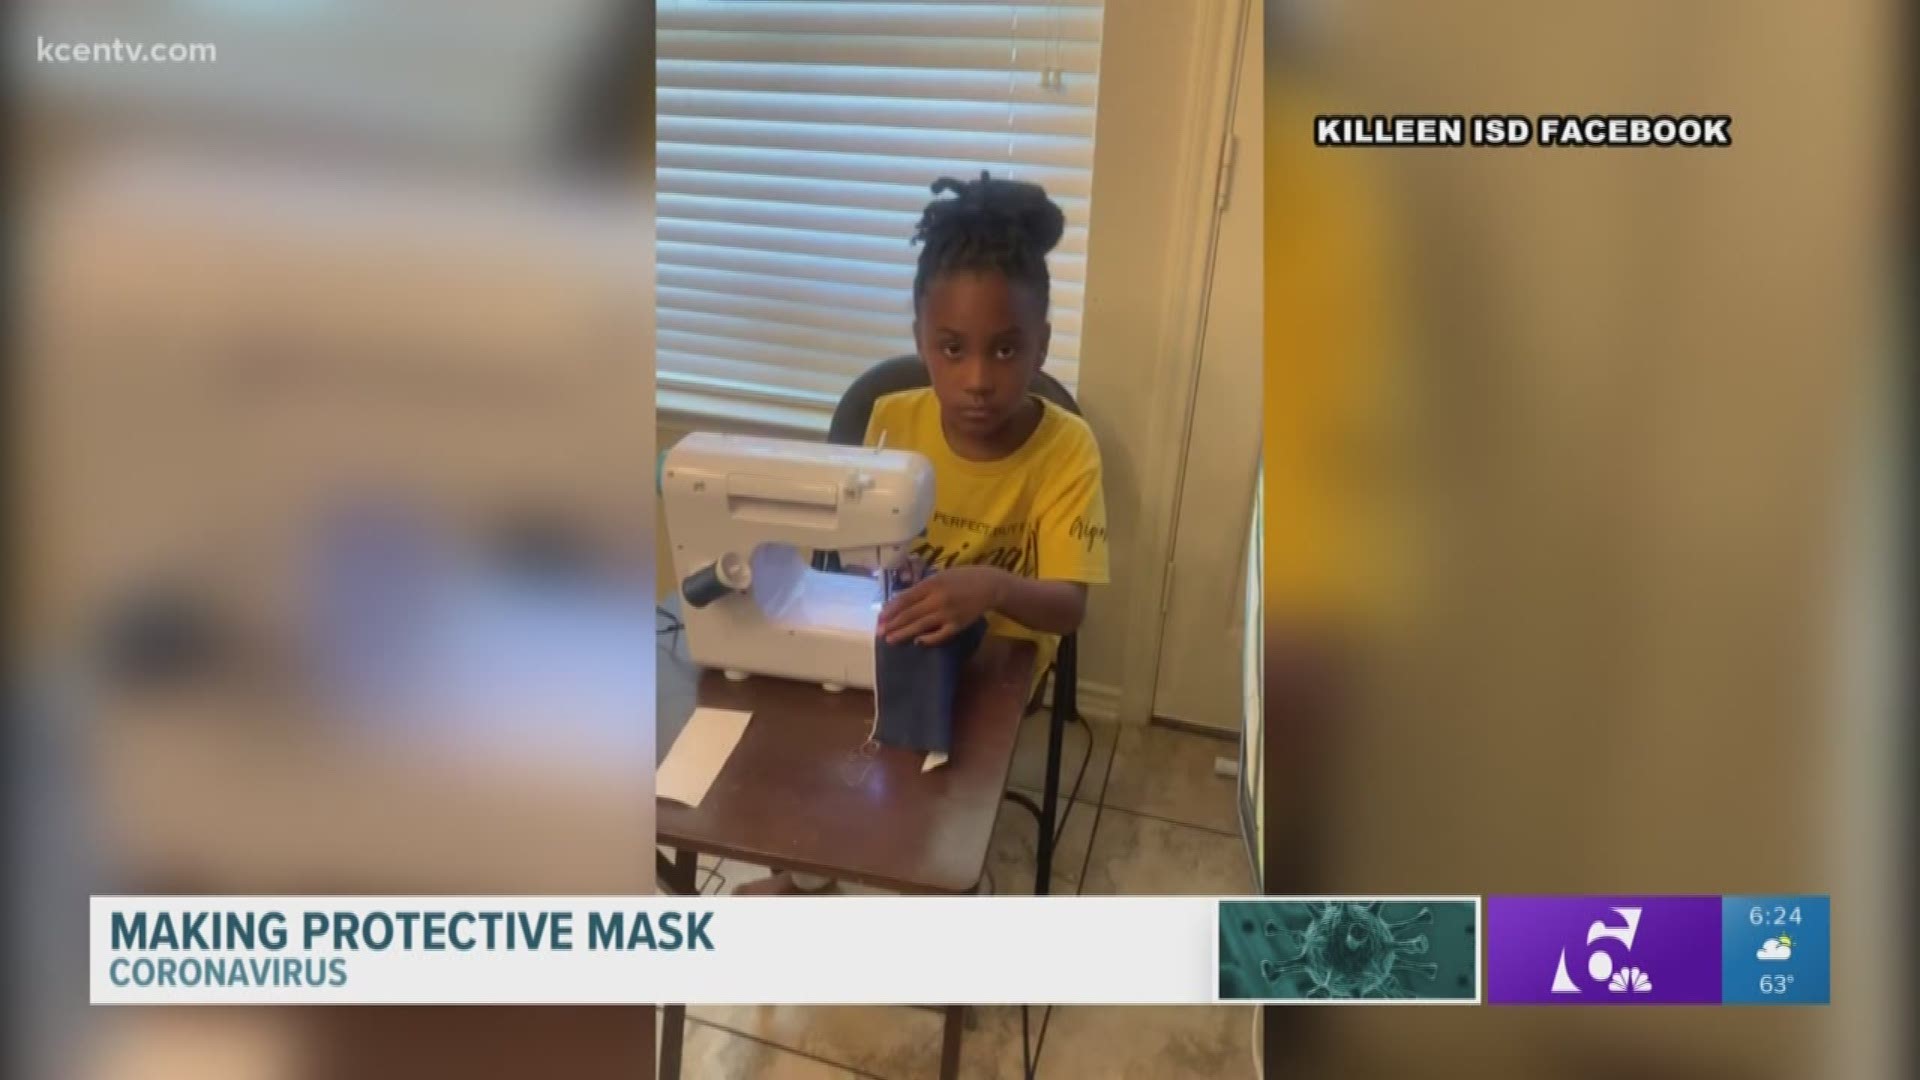 Reeces Creek Elementary School fourth-grader Ciana Calzado began making masks for her mom, who is a nurse, and her coworkers.